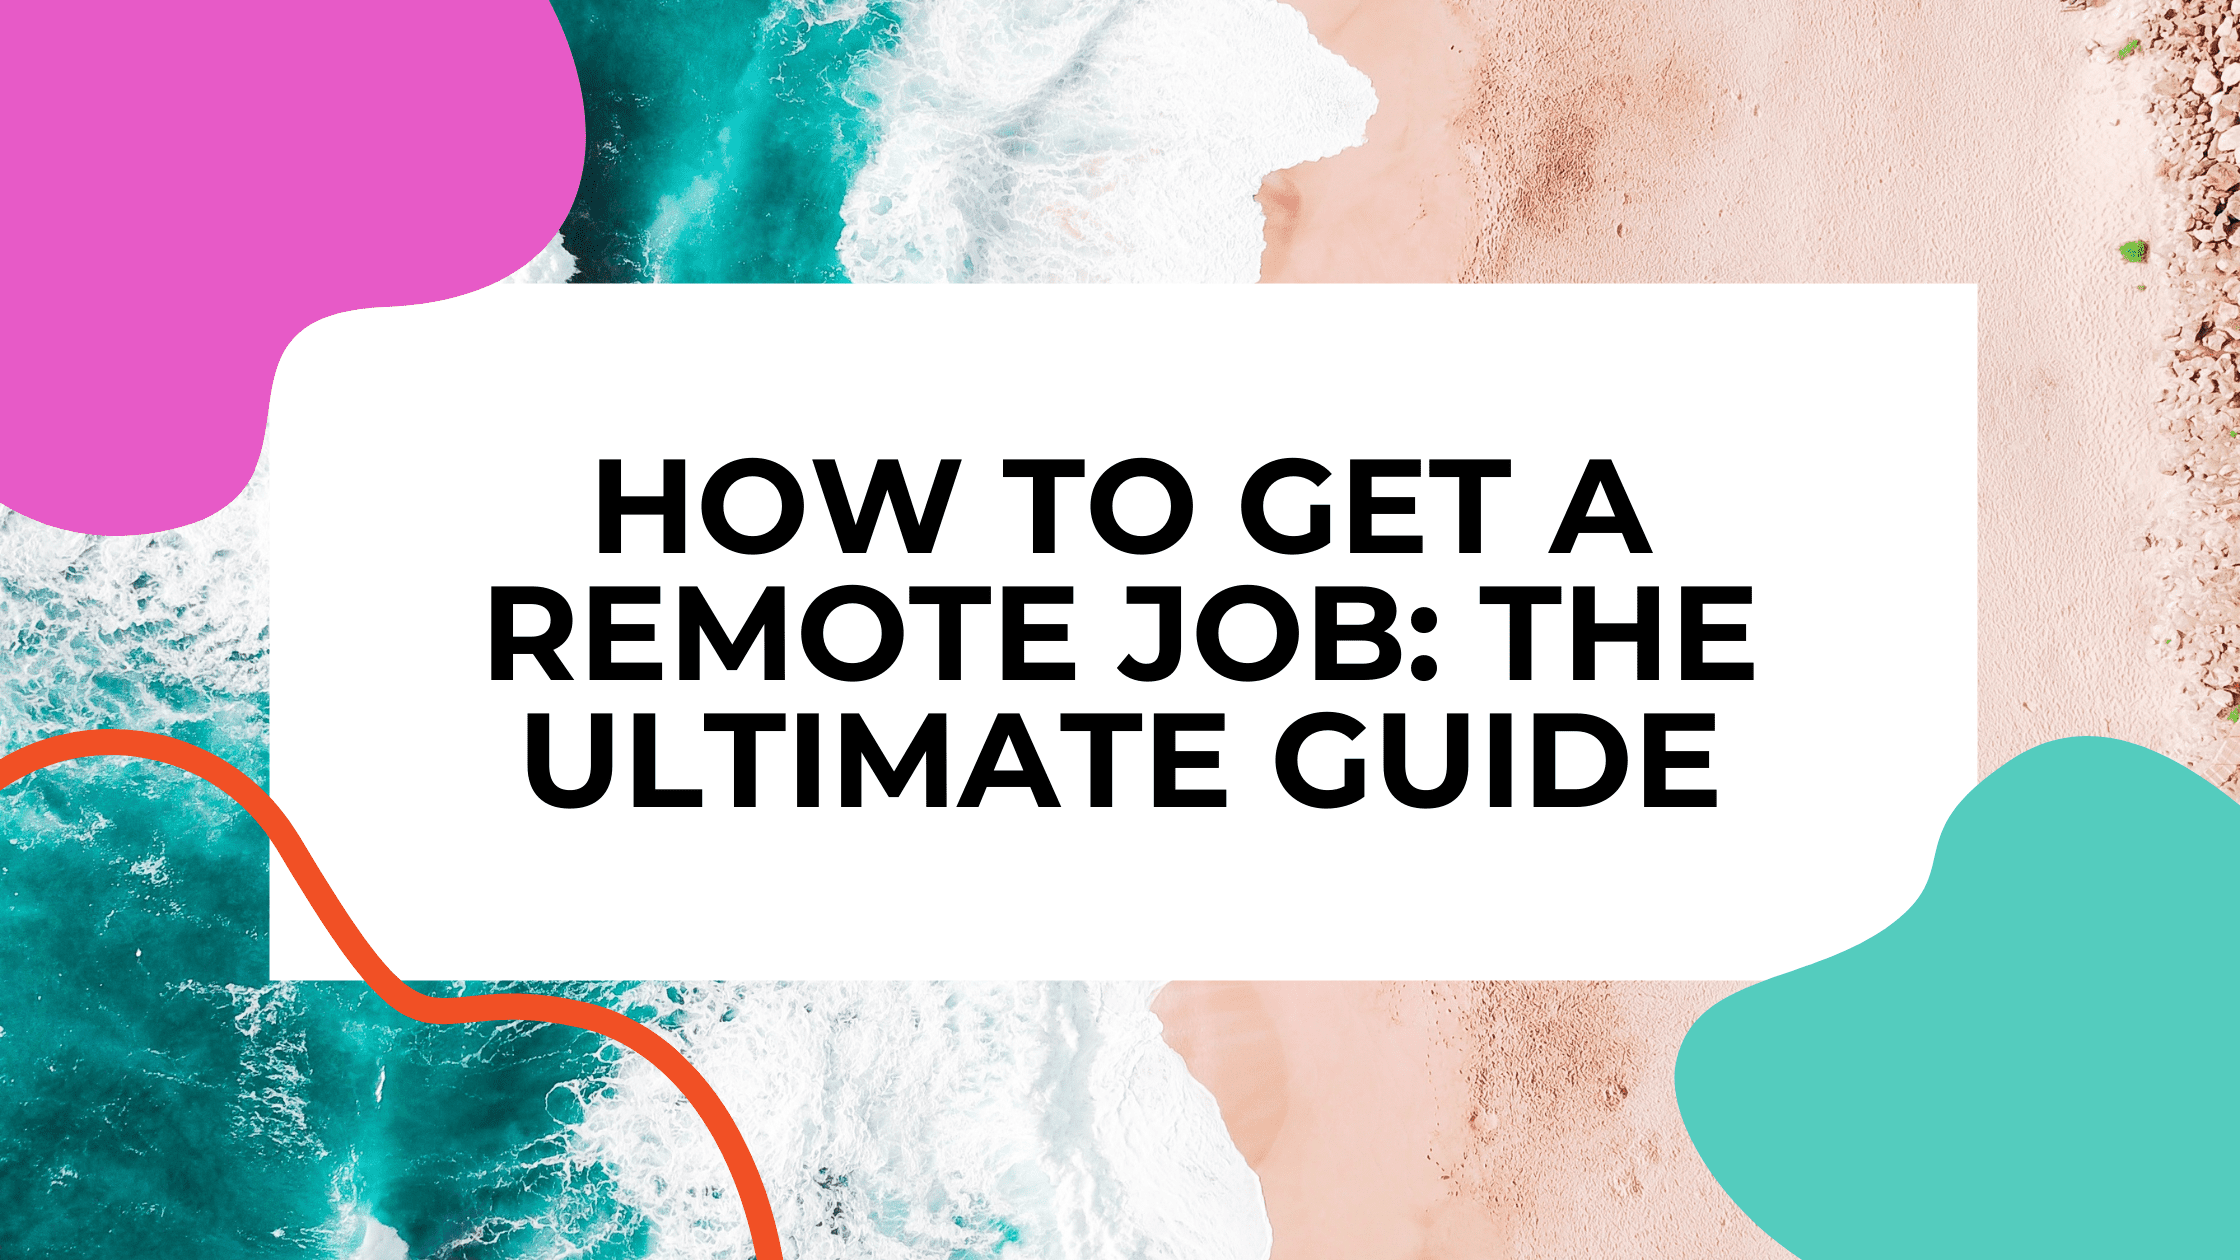 How to Get a Remote Job in 2022 and Work From Anywhere